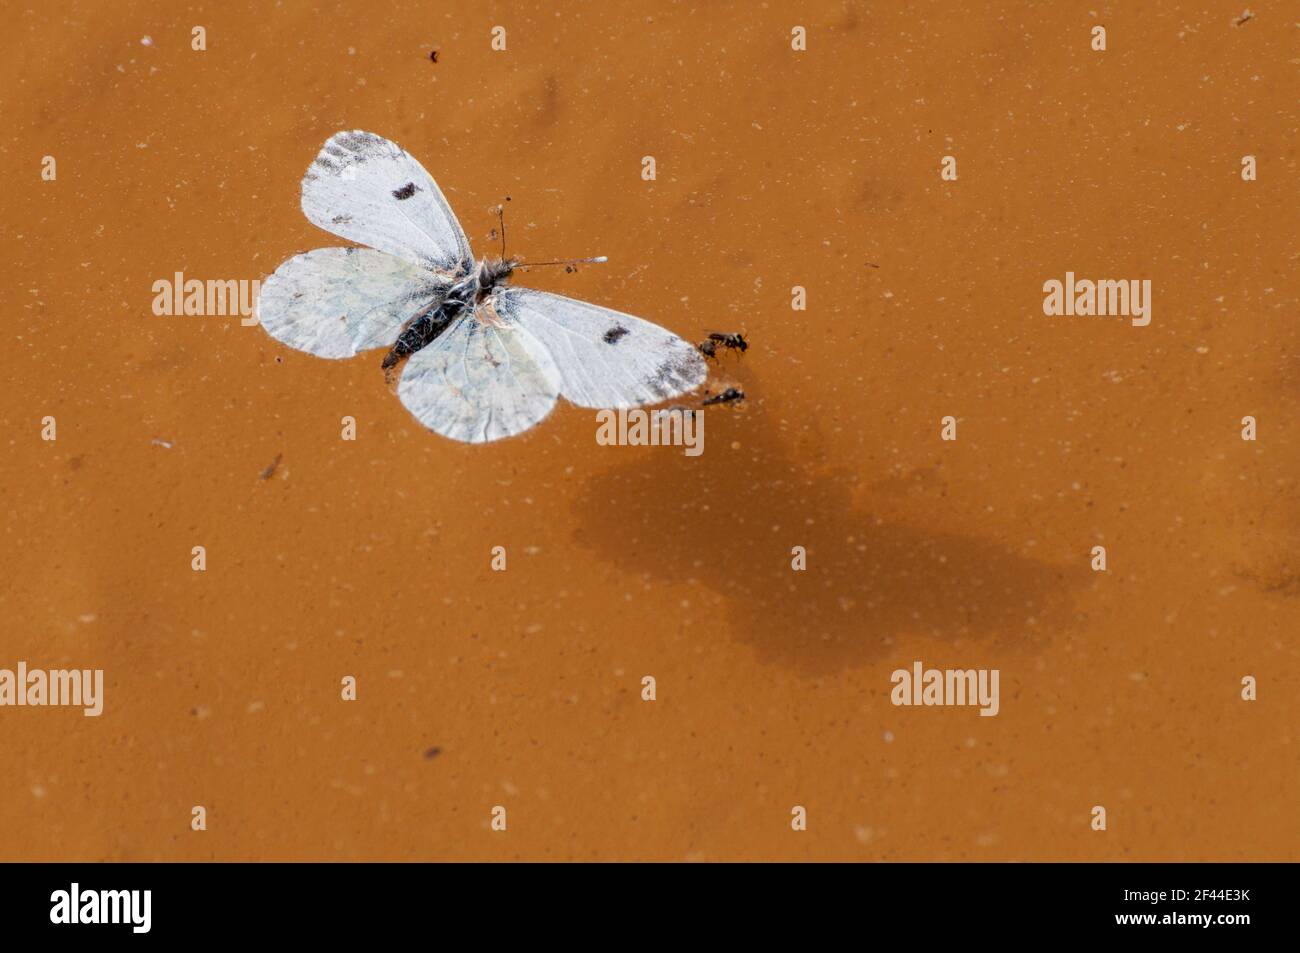 a dead Large White or Cabbage White (Pieris brassicae) Butterfly floats in a water puddle Stock Photo